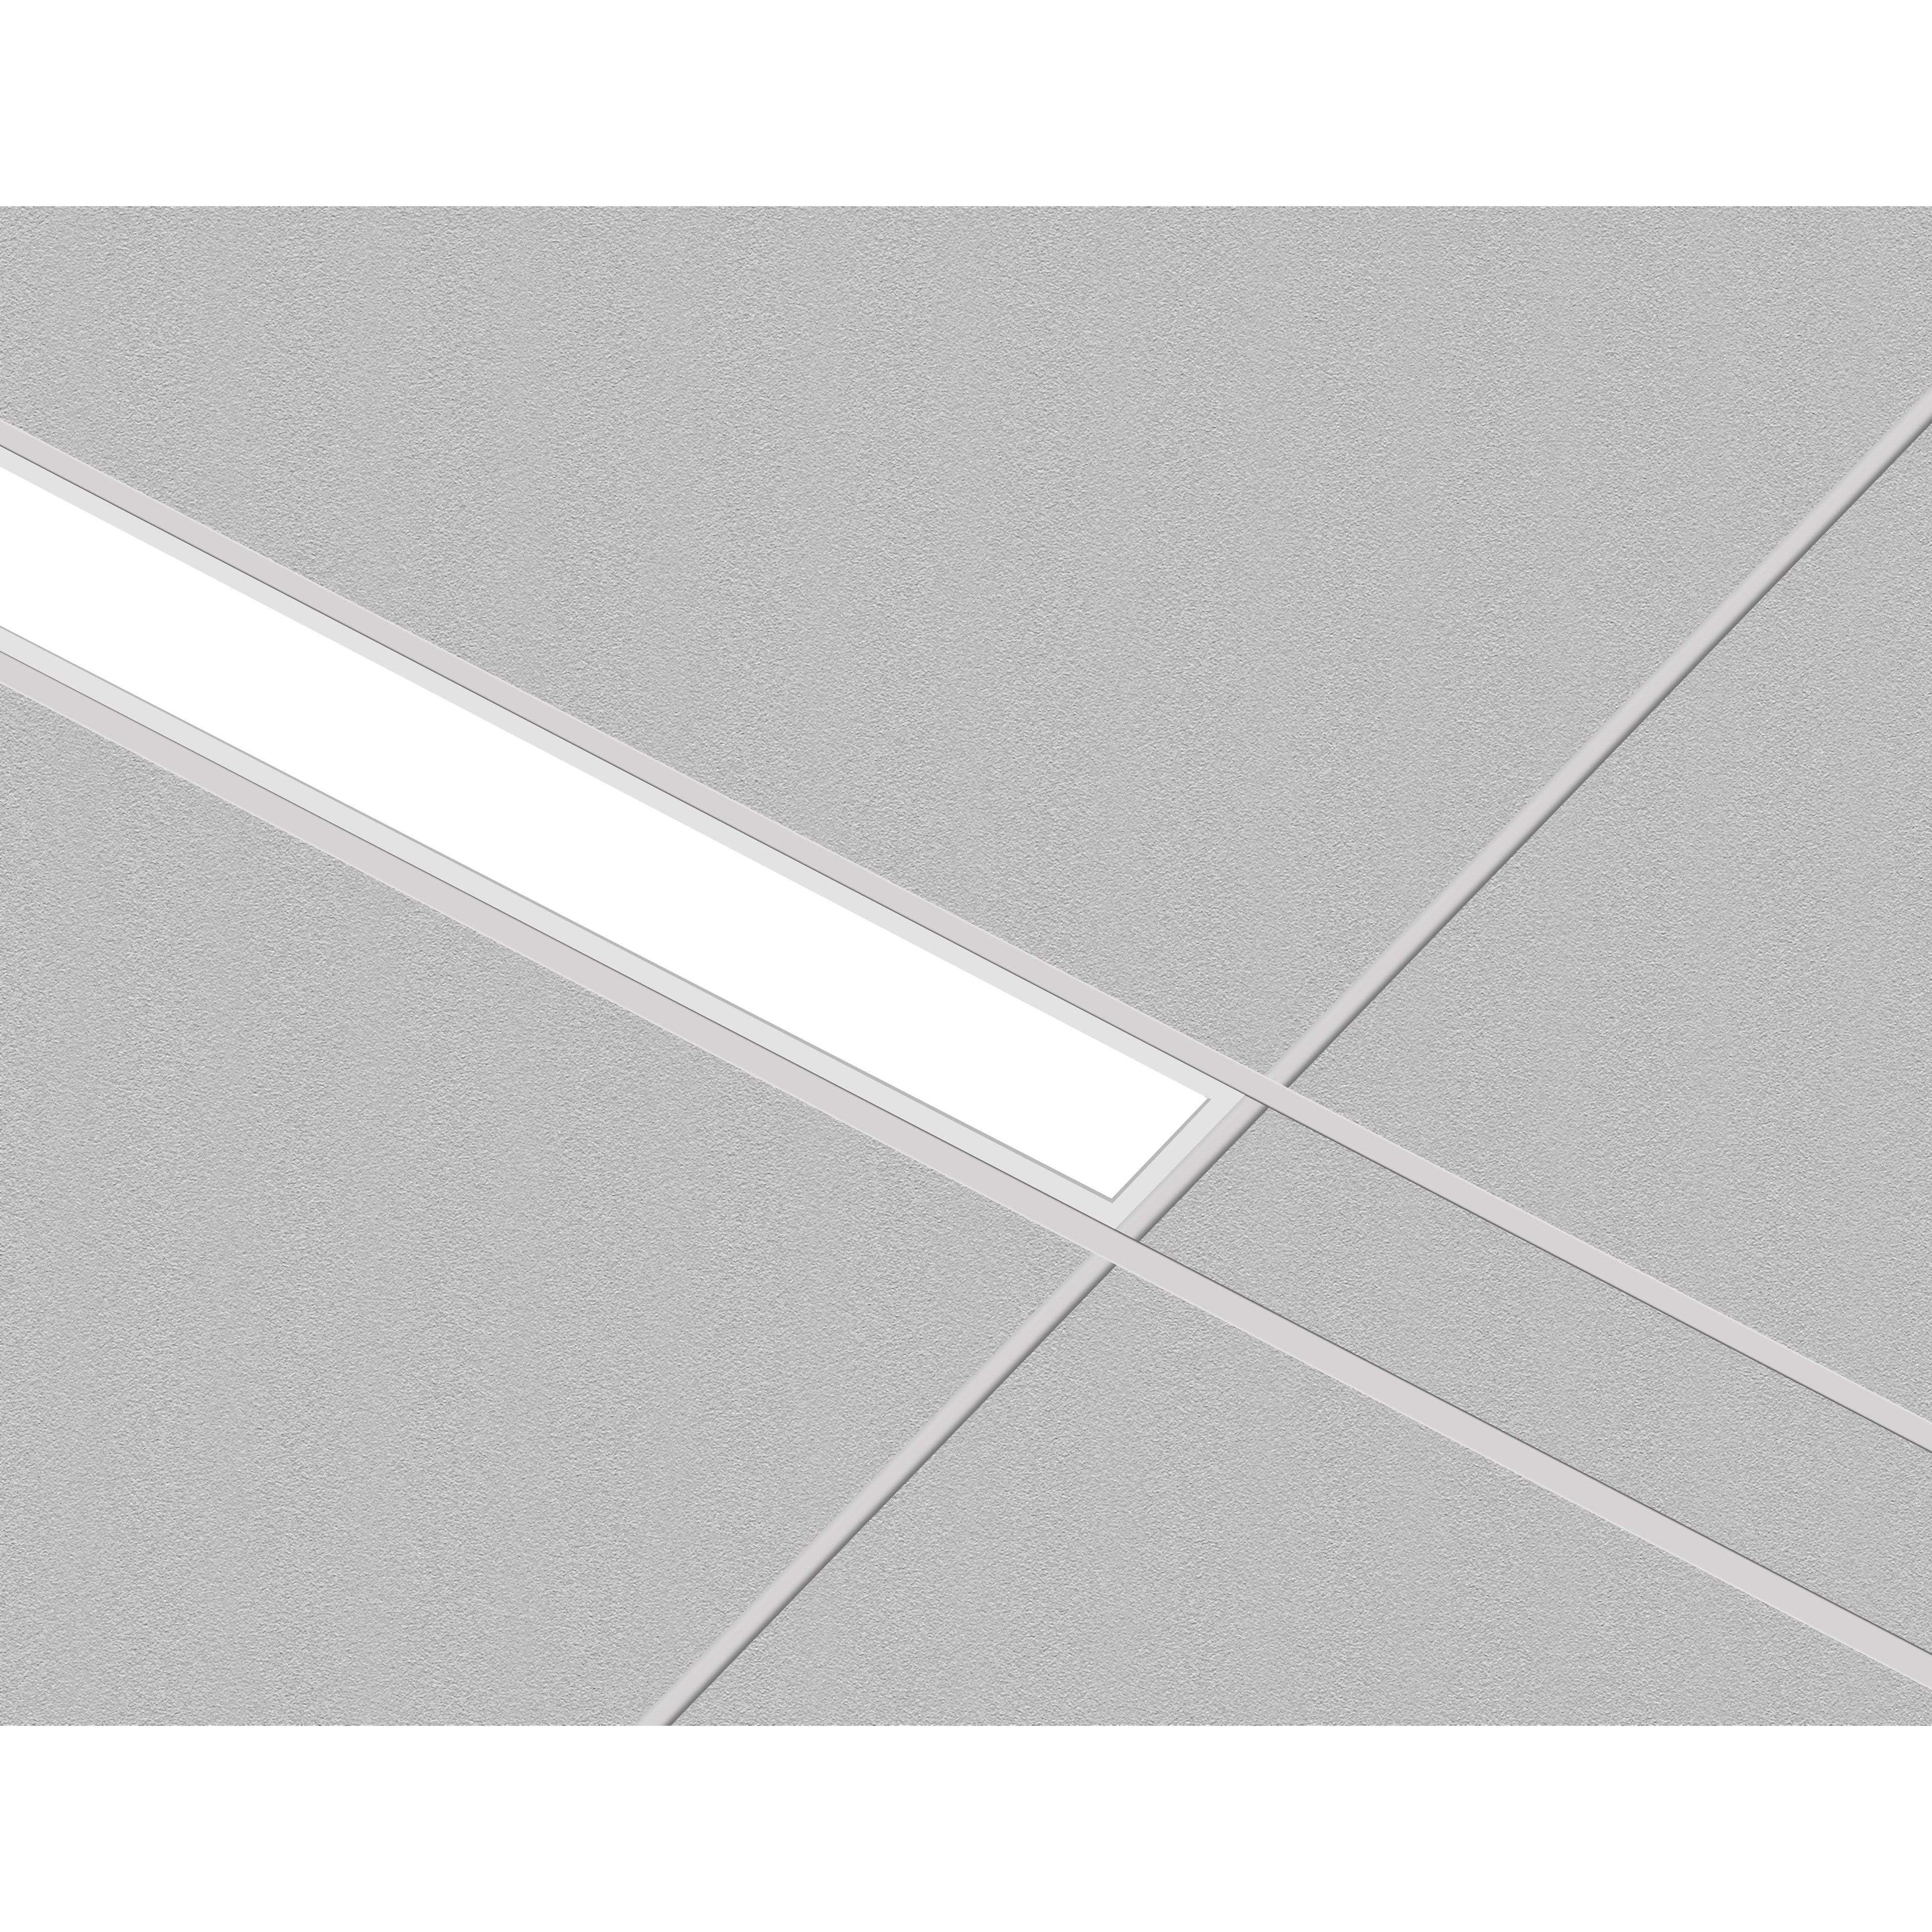 POE Texas Lighting Denton Linear Recessed PoE Lights - 6 in x 8 ft (Surface)